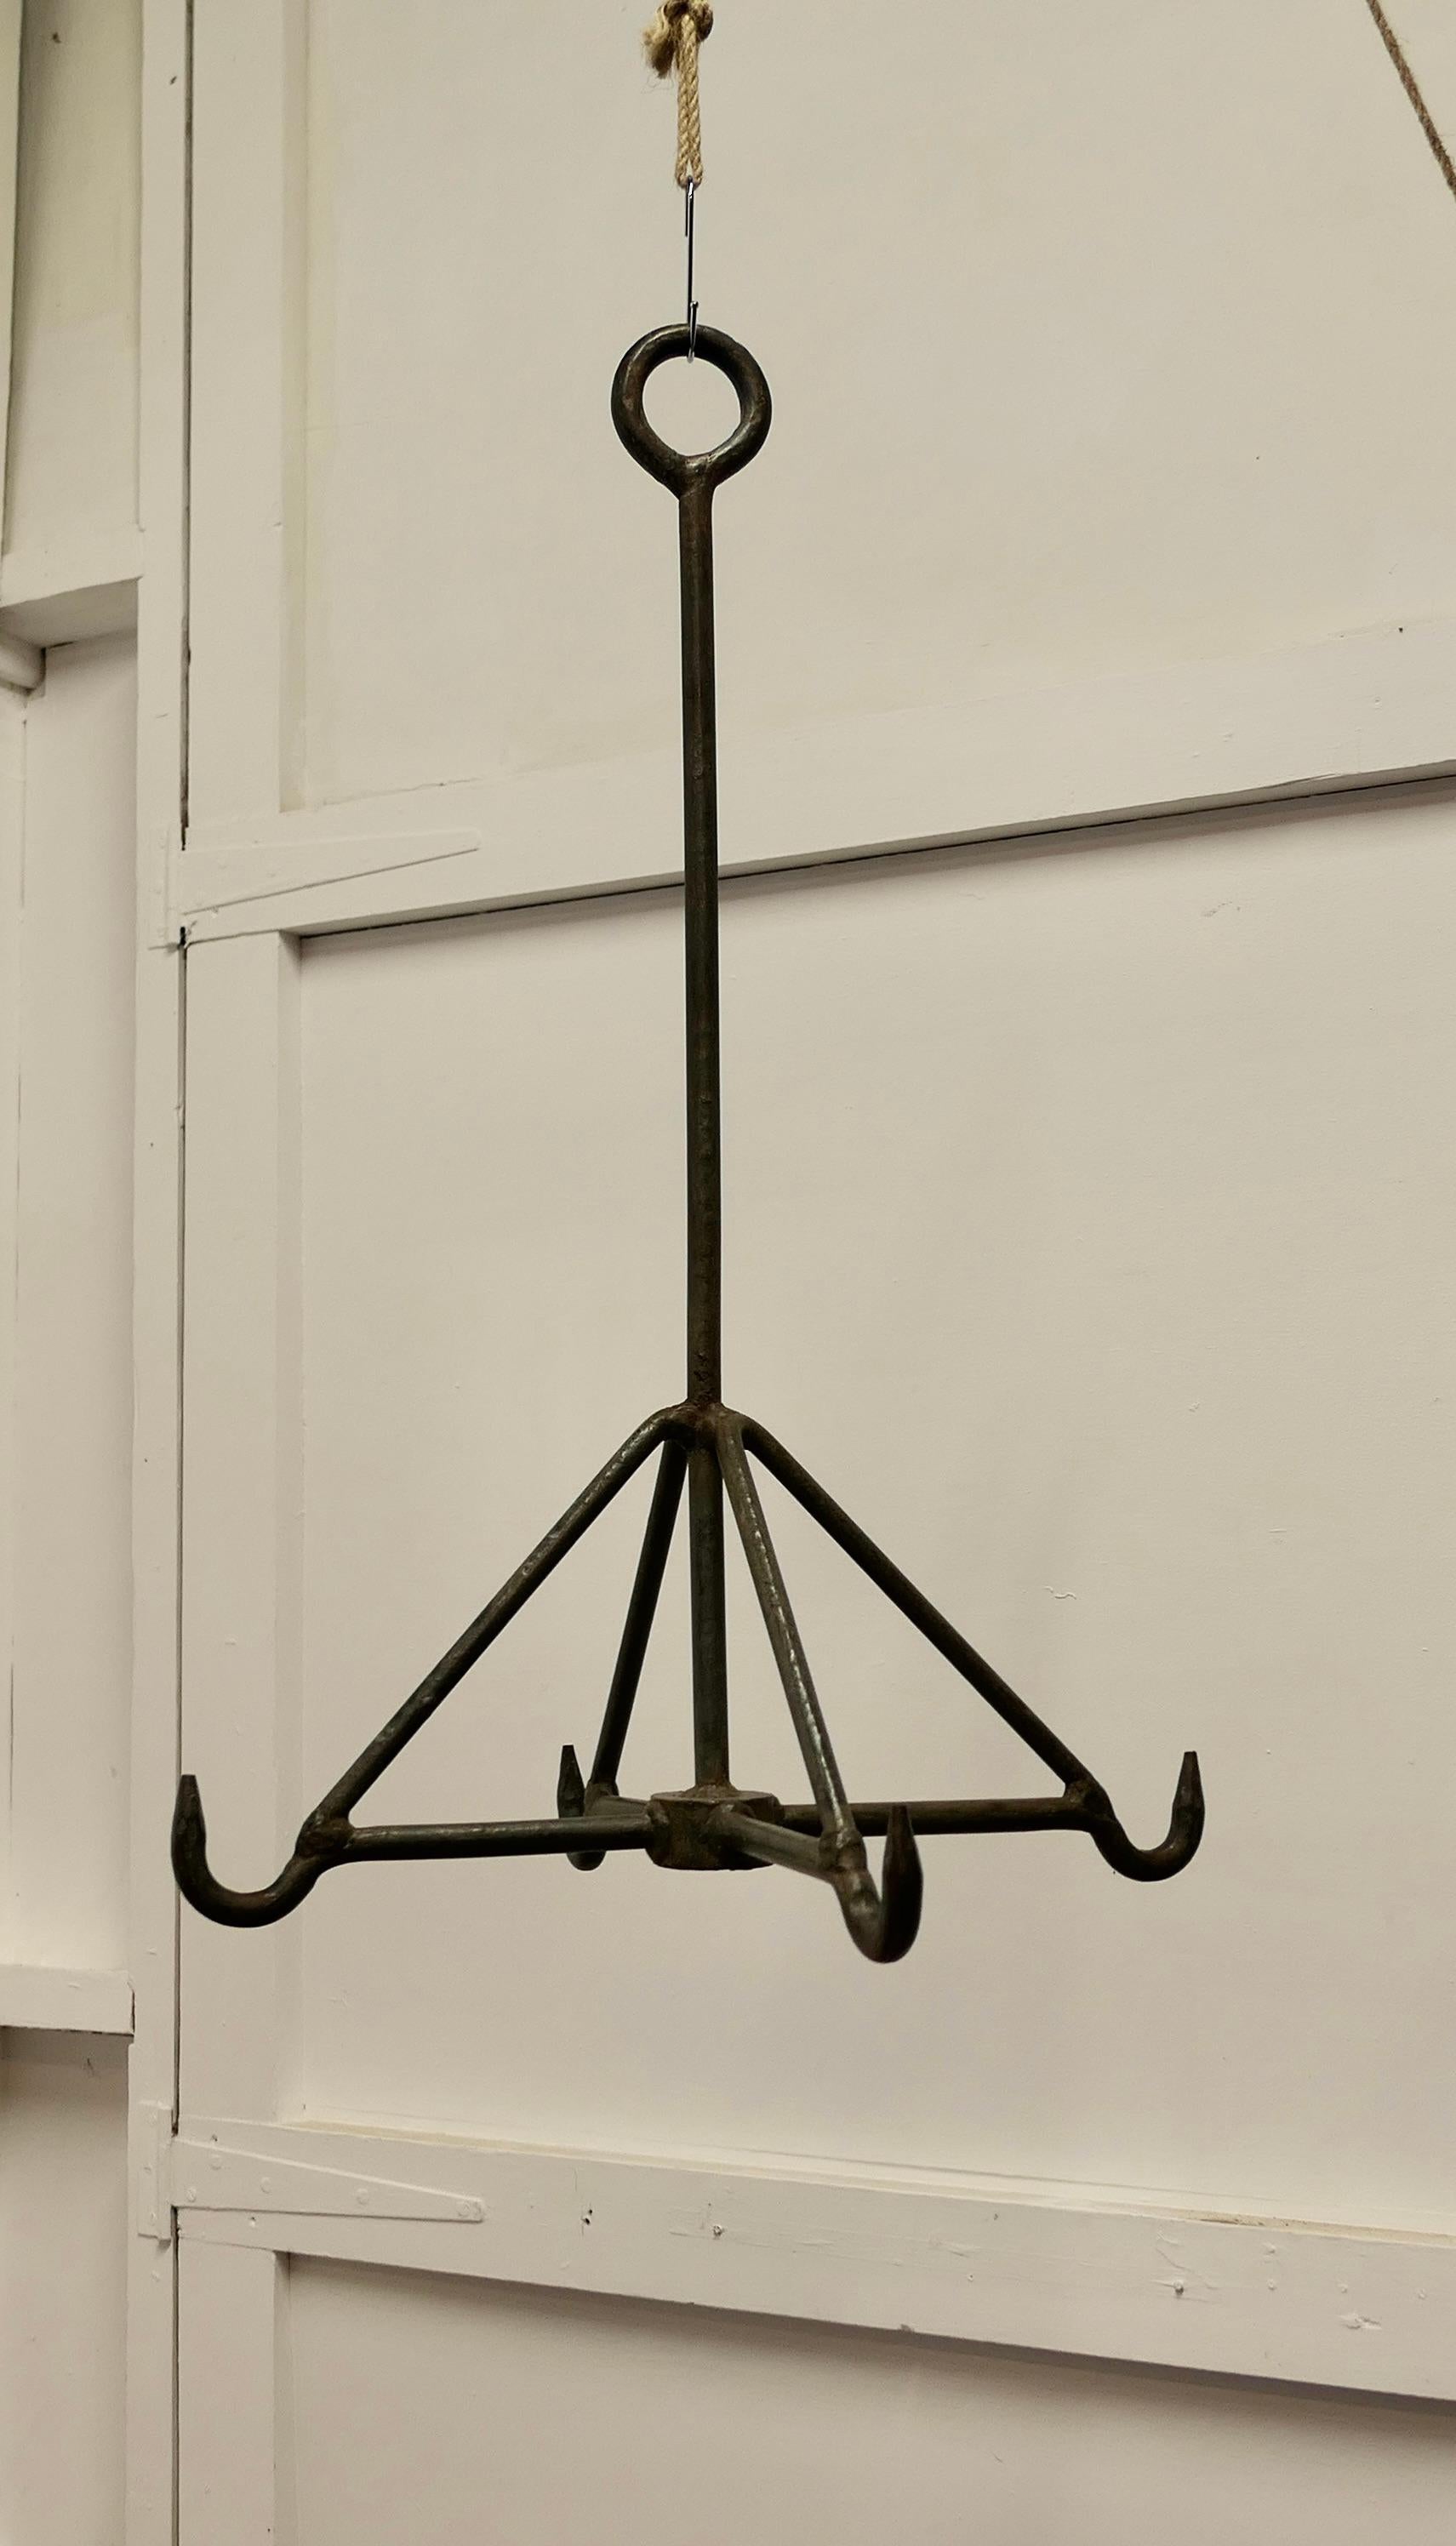  Blacksmith Made Iron Game Hanger, Kitchen Utensil or Pot Hanger

A great piece with lots of Character, if you don’t need it to hang your game on how about your pots or kitchen utensils
The hanger is 20” in square with large hook on each corner and